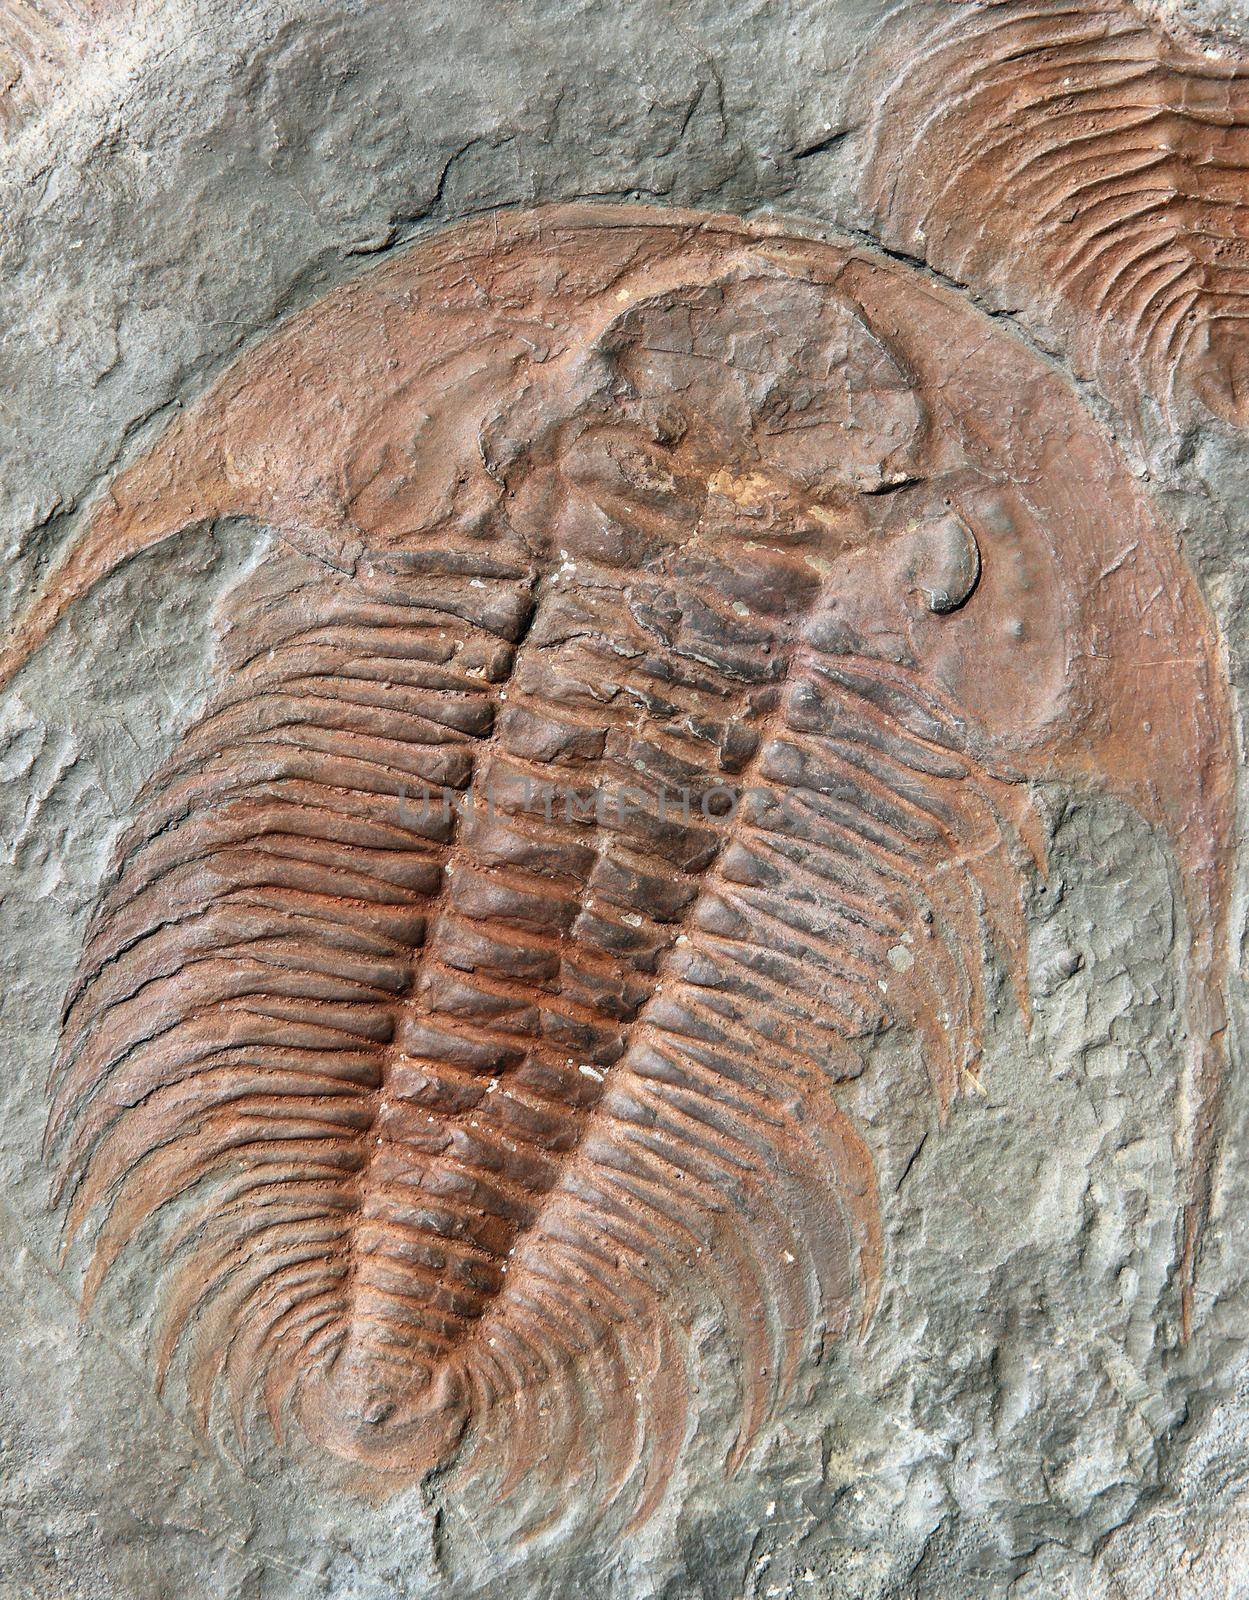 Fossil of a trilobites from the early ordovician period found in Czech Republic